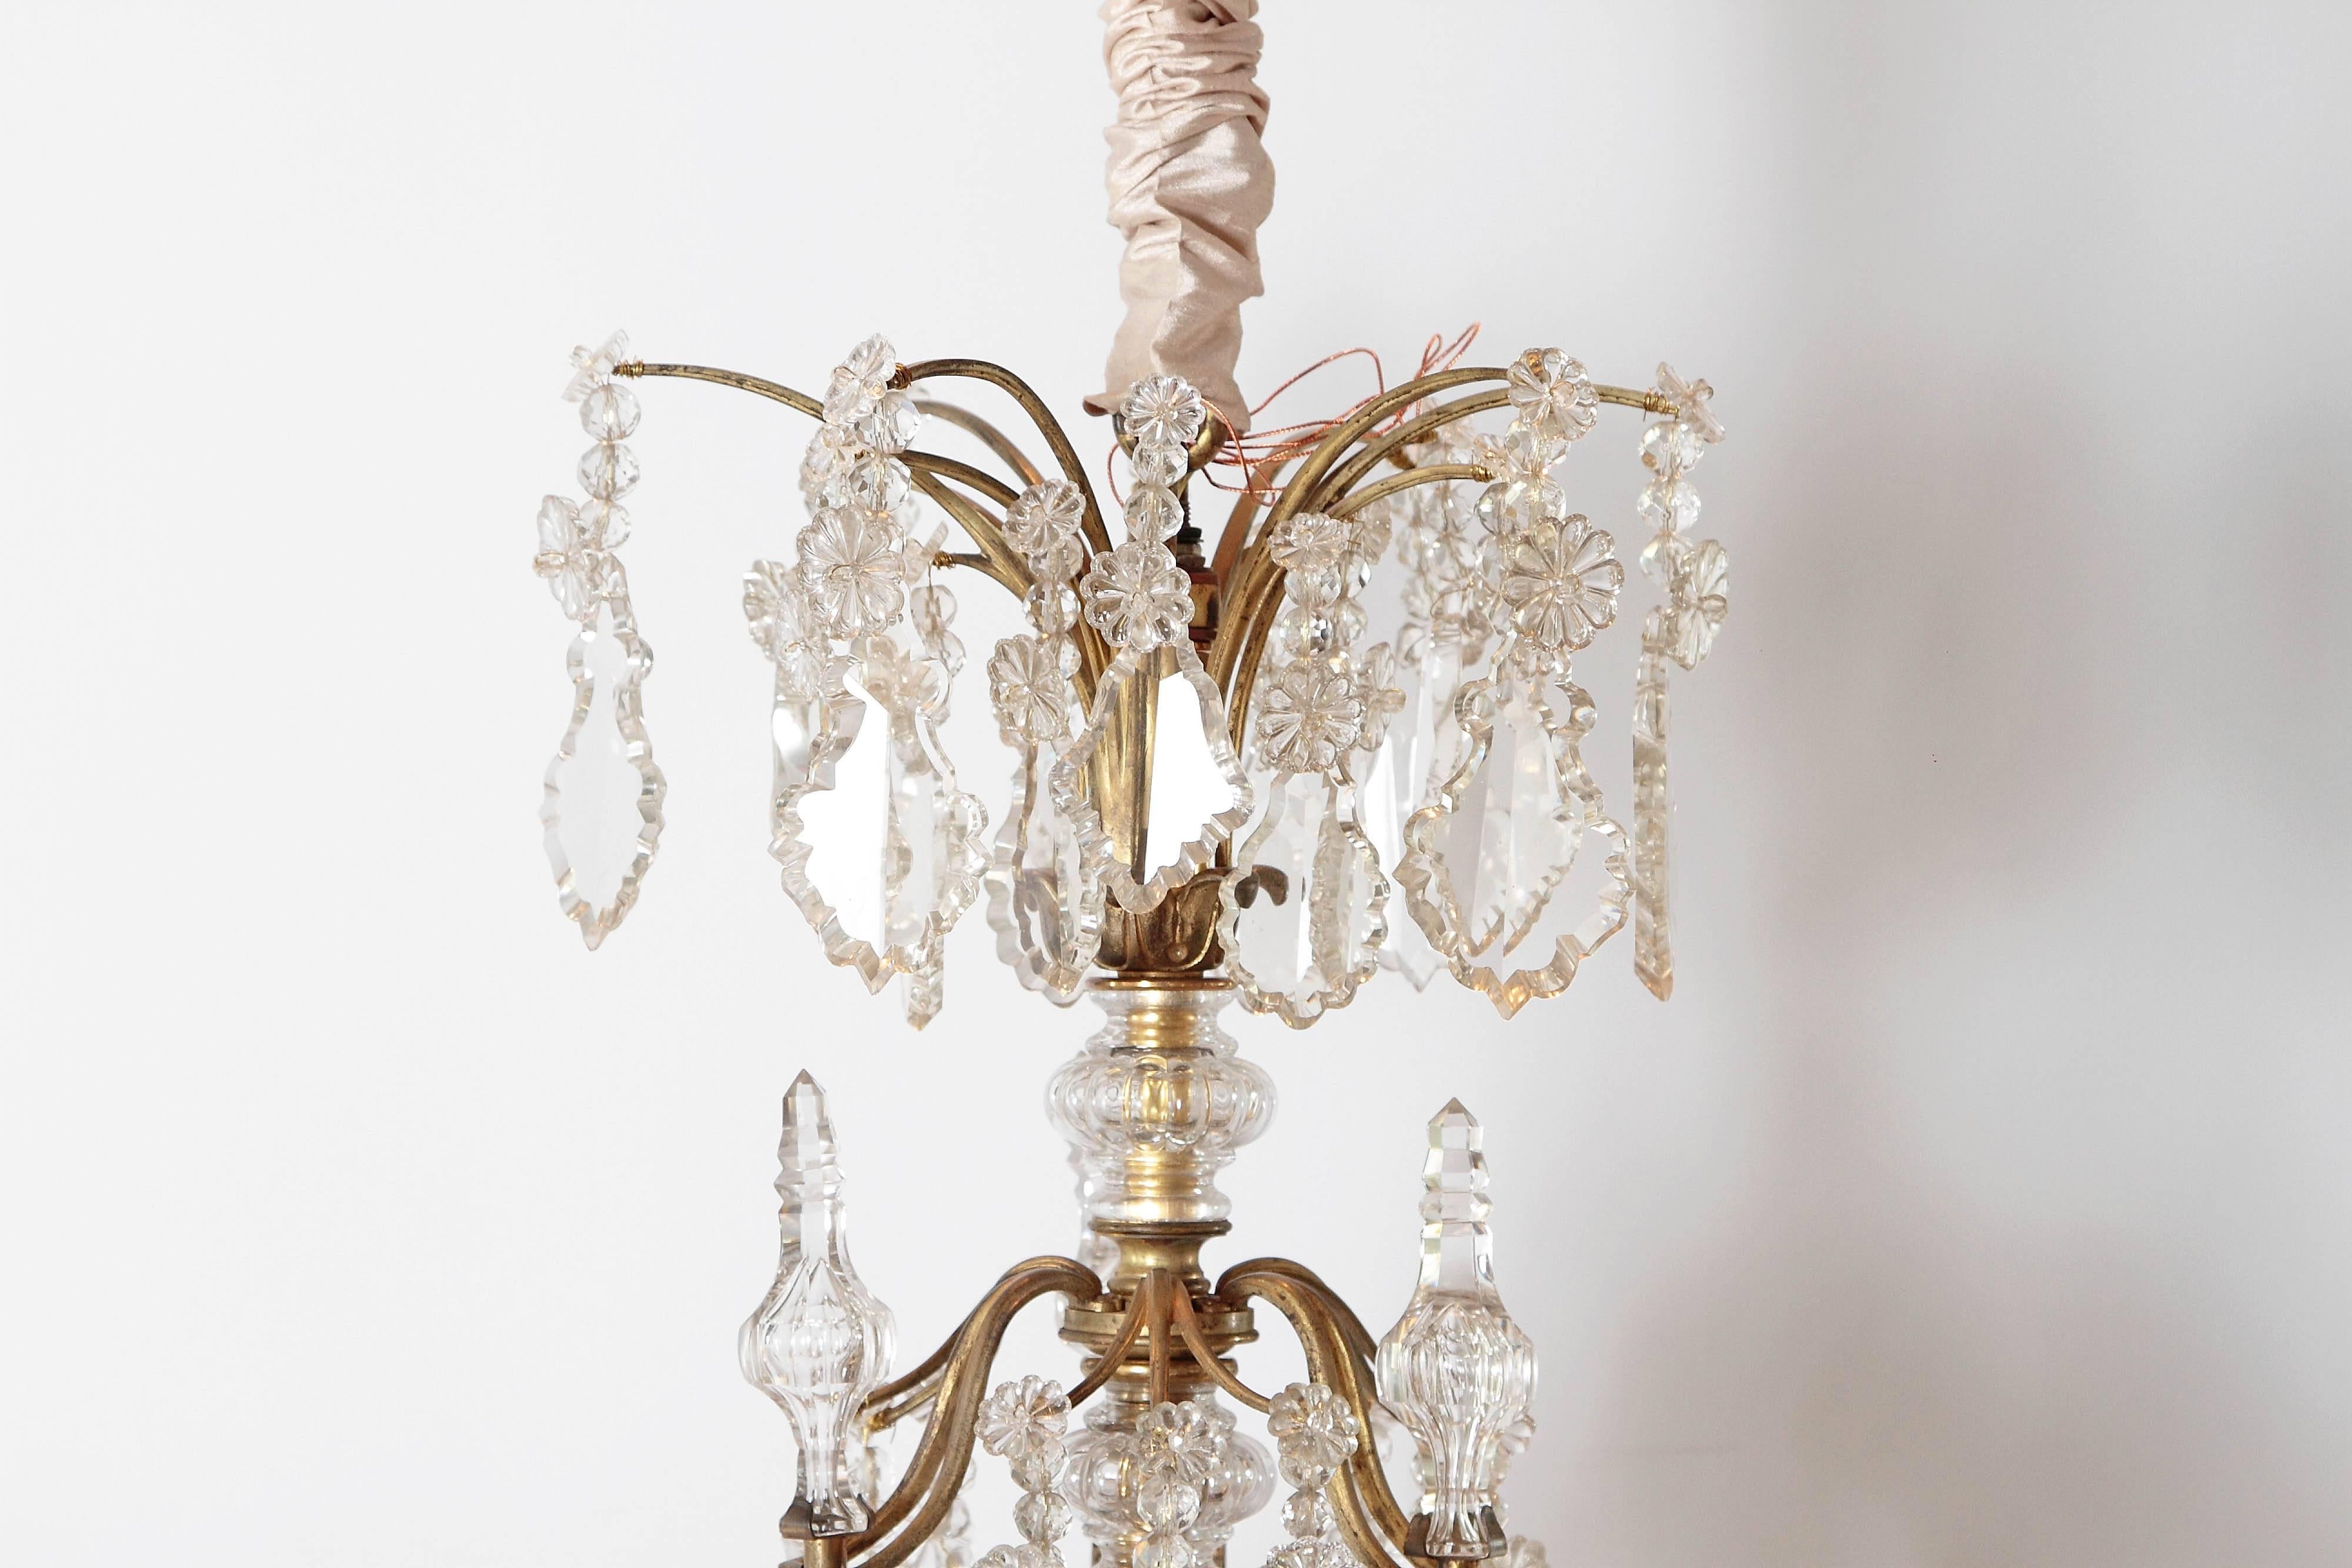 A Louis XV style crystal chandelier with central crystal clad stem and gilt bronze arms with crystal swags and drops, late 19th century, France.